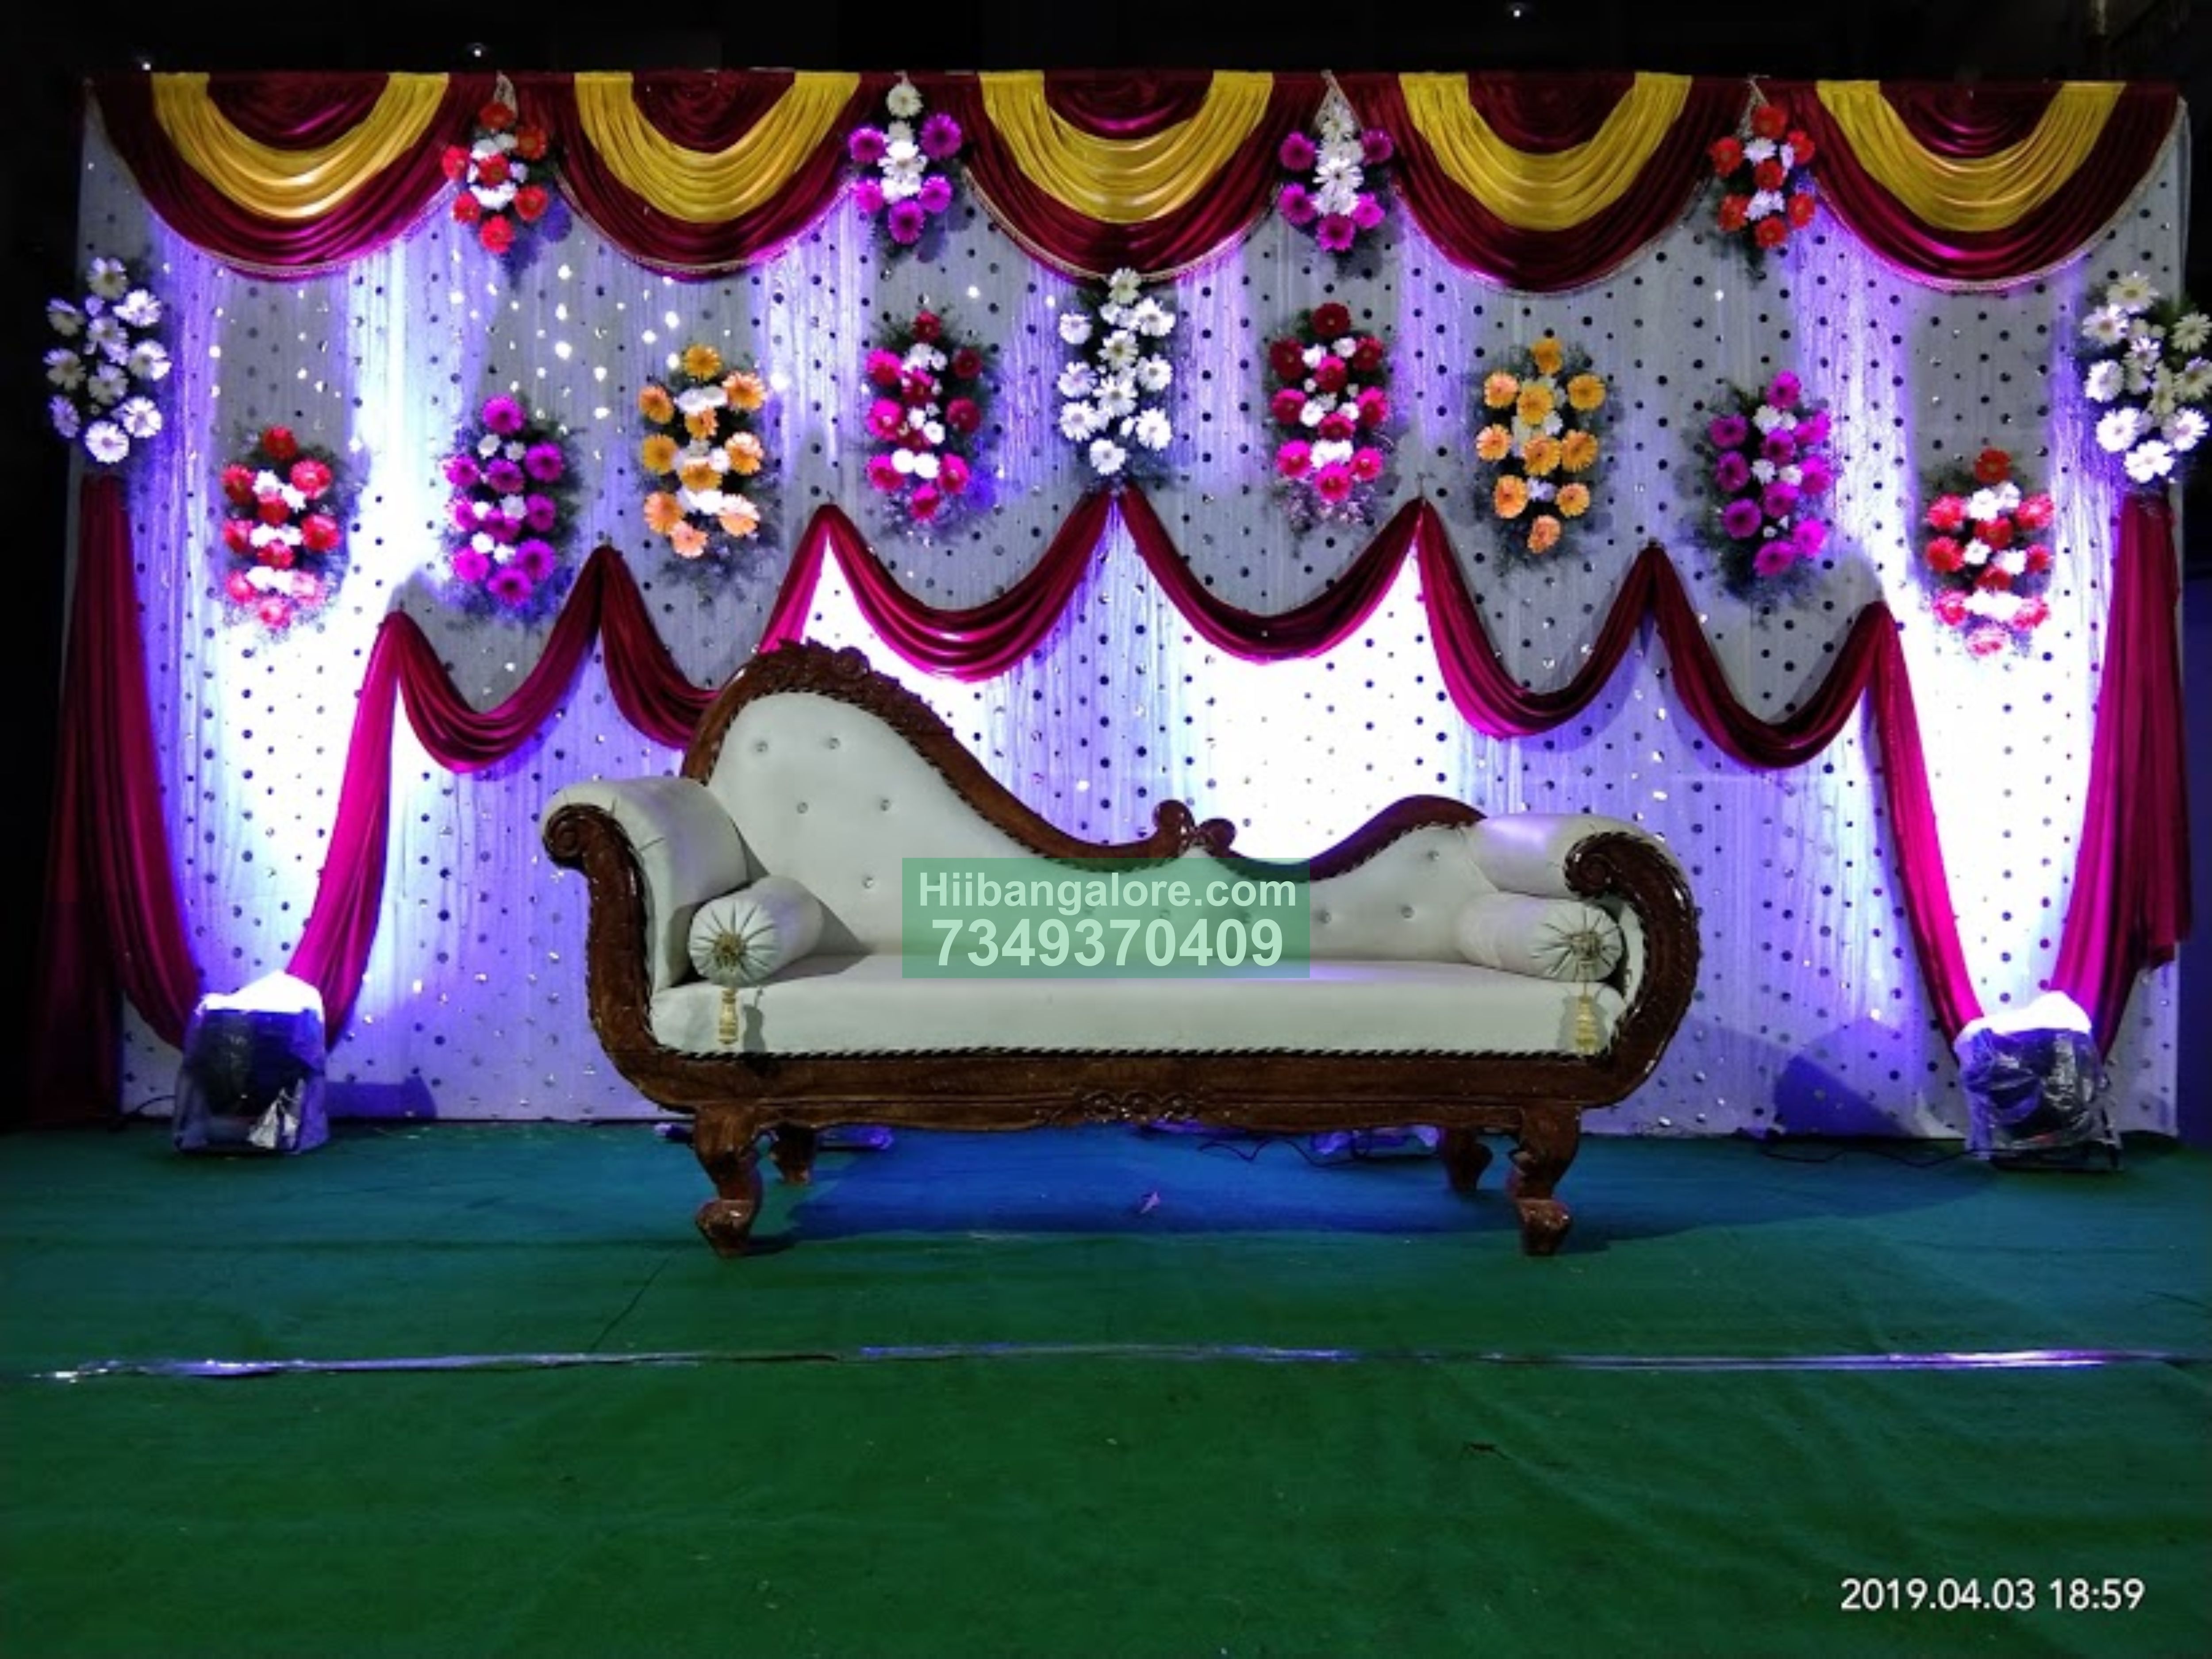 Engagement decorations bangalore - Best Birthday Party Organisers, Balloon  decorators, Birthday party Caterers in Bangalore